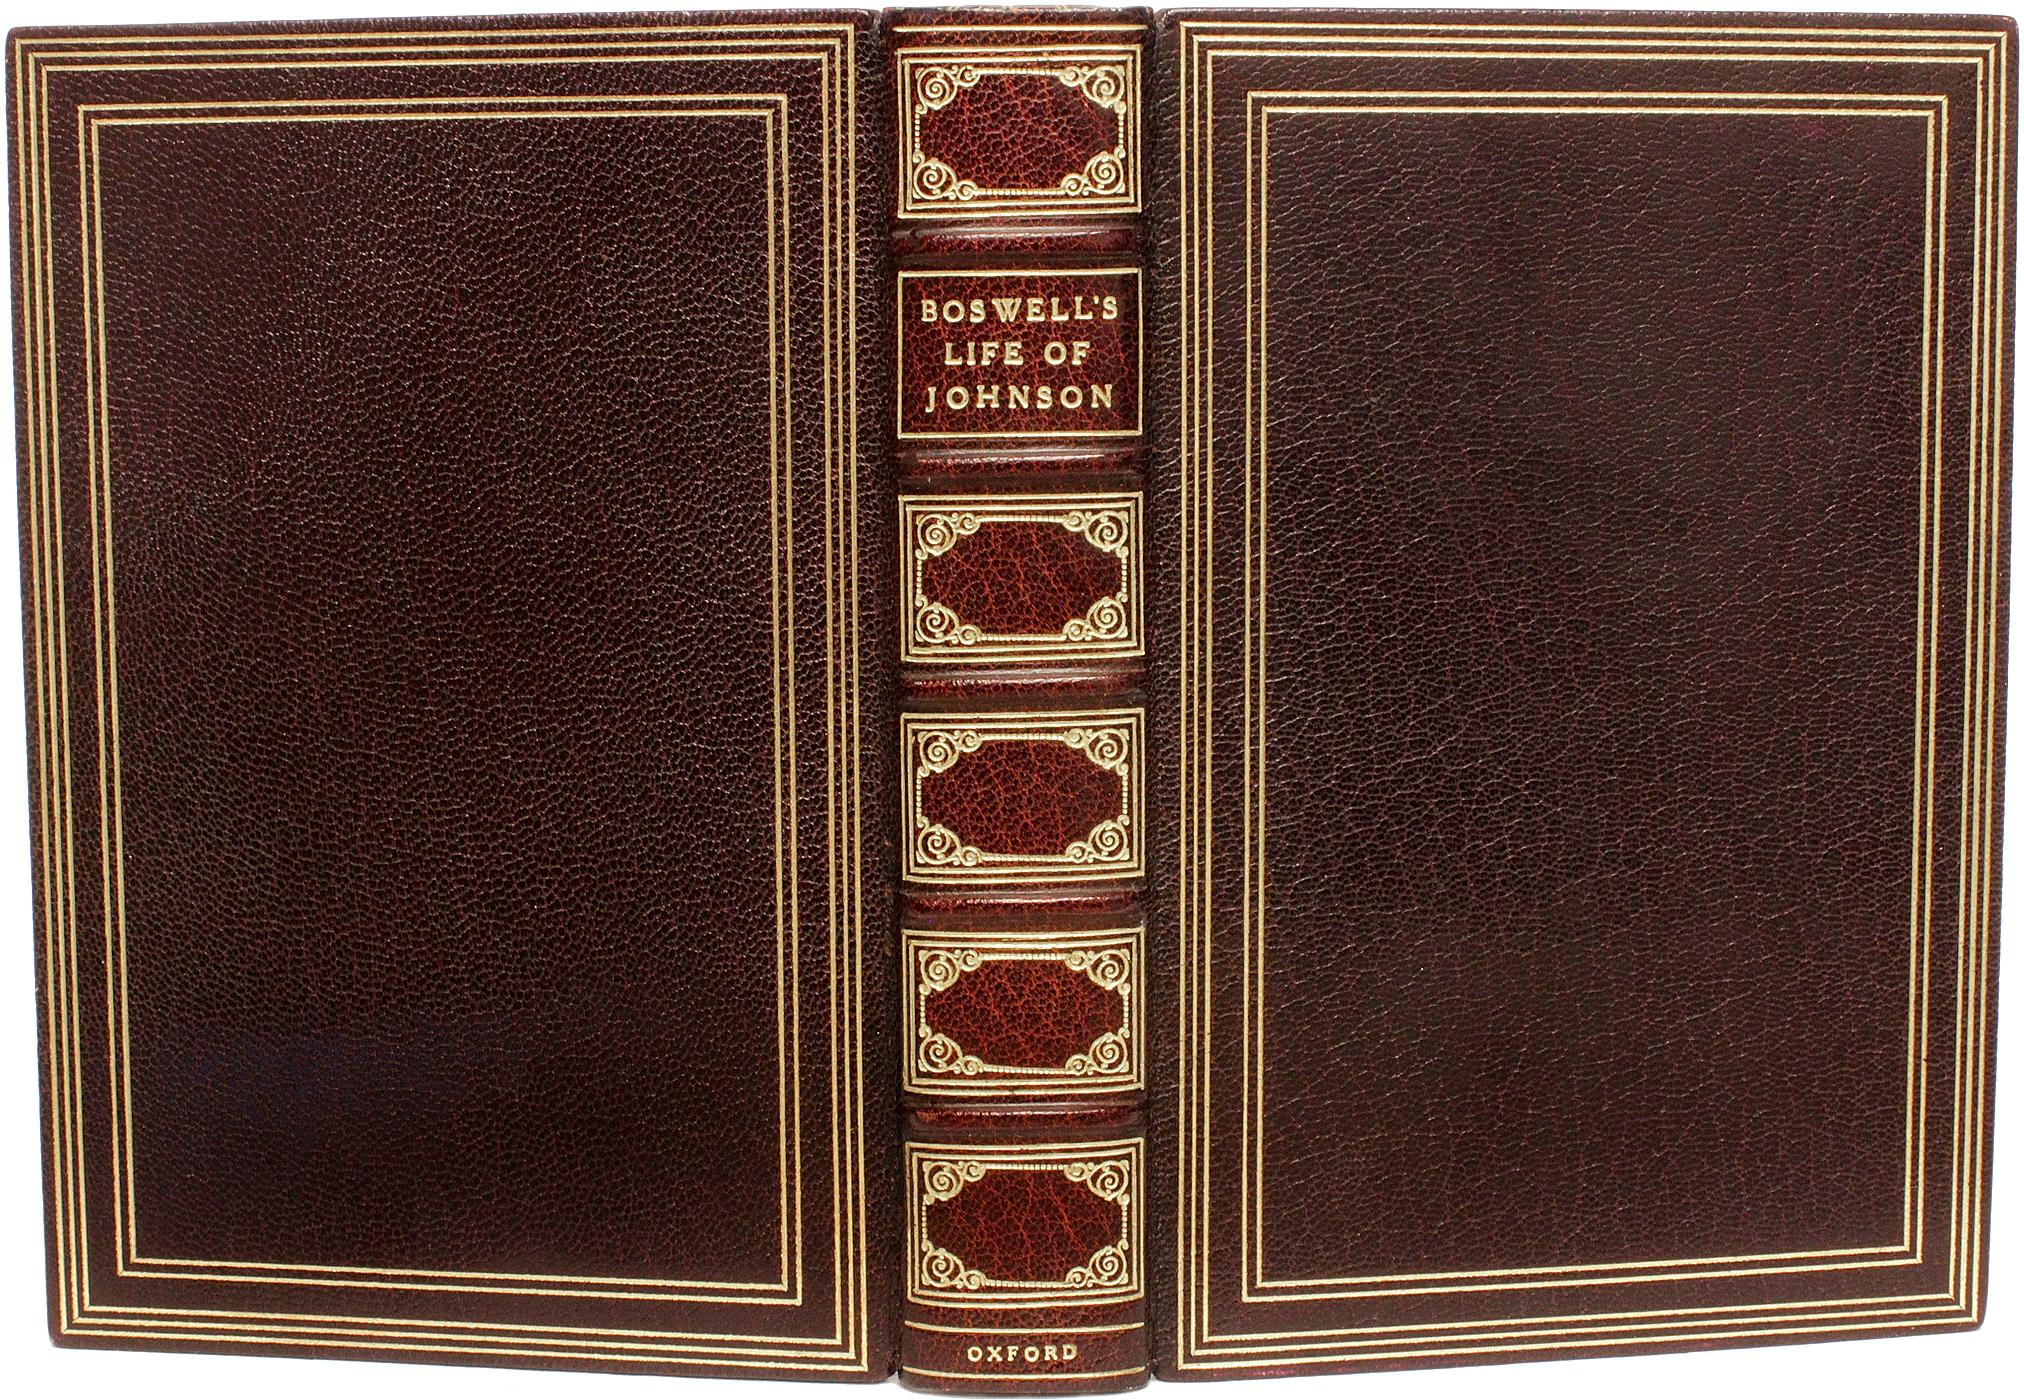 AUTHOR: BOSWELL, James

TITLE: Boswell's Life of Johnson.

PUBLISHER: Oxford University Press, 1924.

DESCRIPTION: INDIA PAPER EDITION. 2 volumes bound in 1, 7-3/8